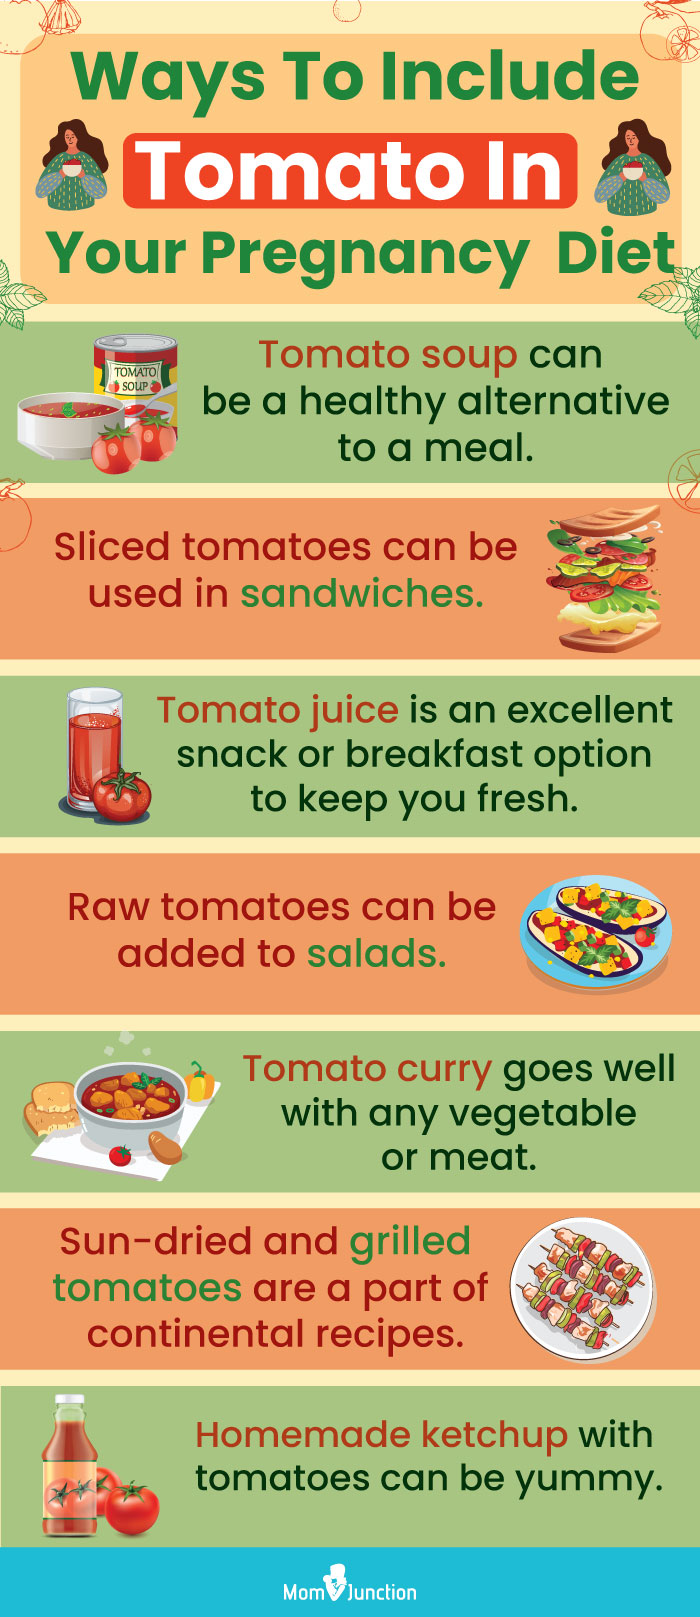 ways to include tomato in your diet pregnancy (infographic)